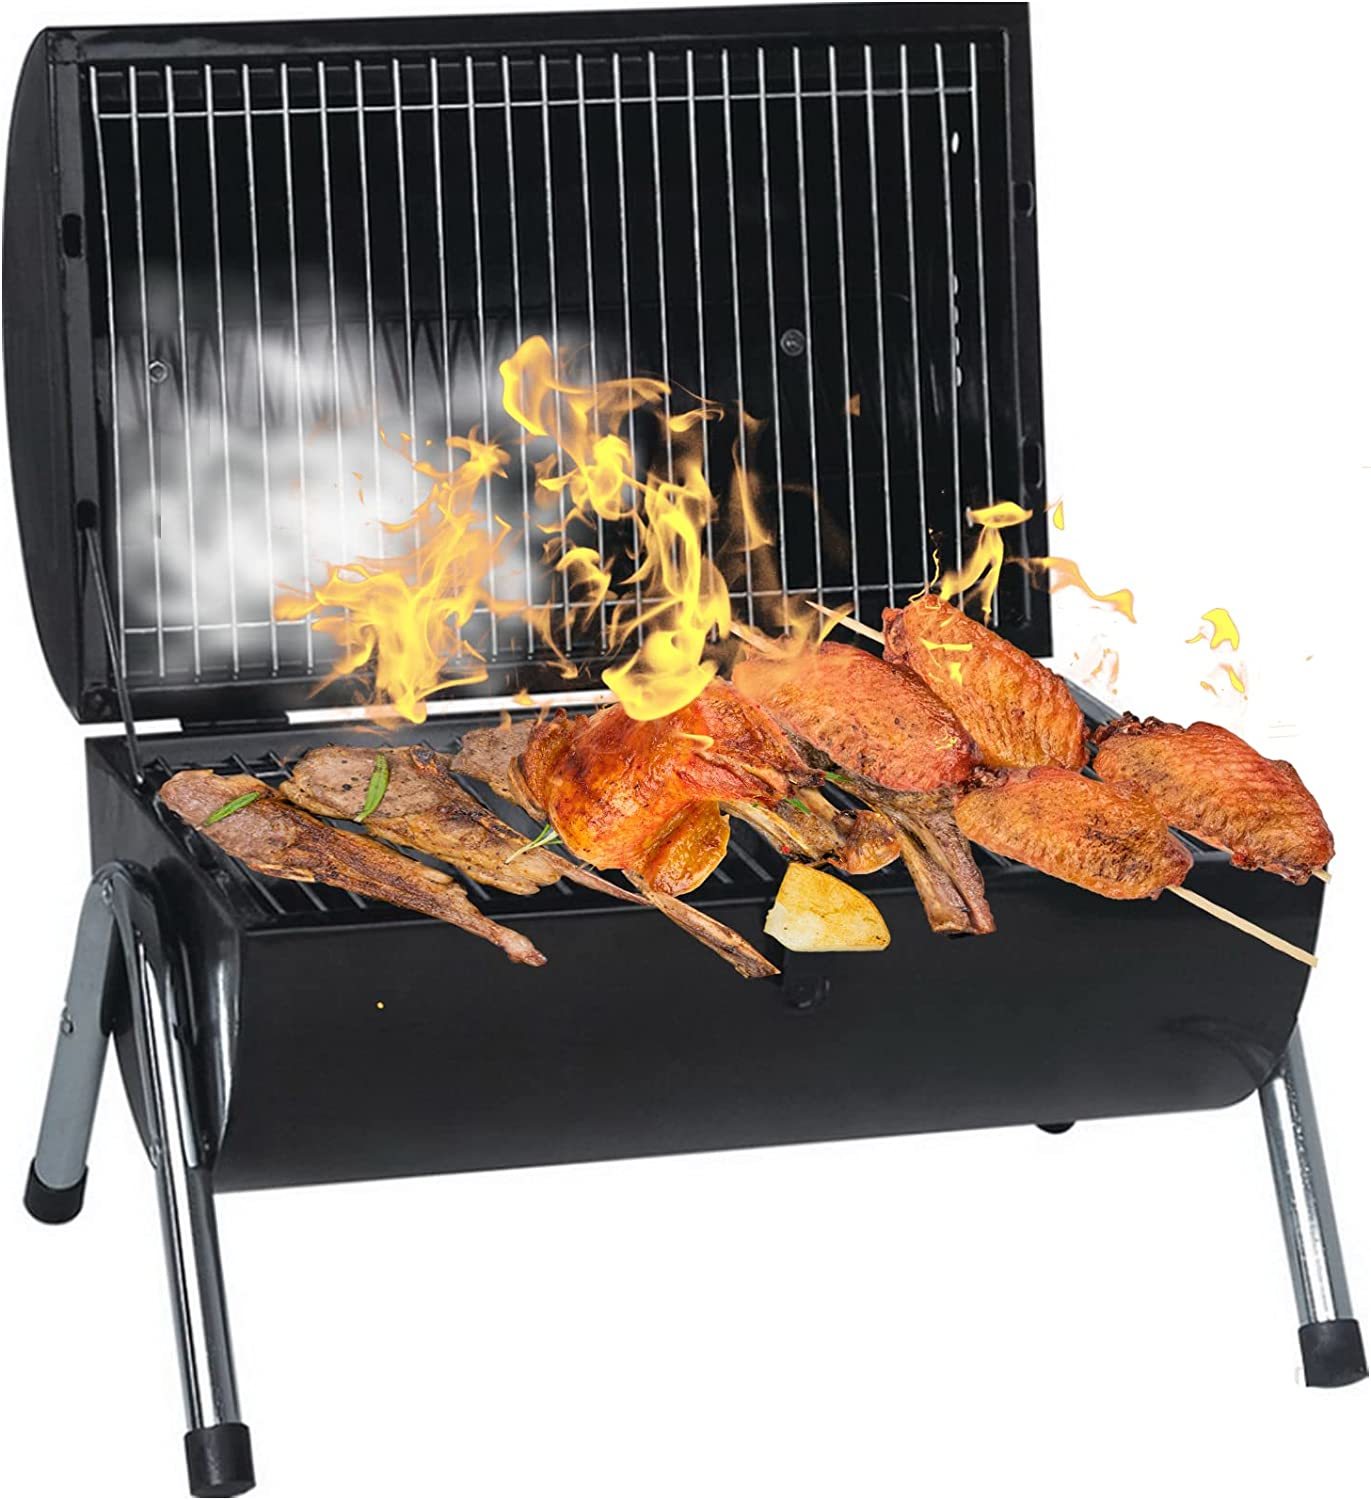 Primary image for For Outdoor Cooking Anywhere, Use The Tiktun Mini Folding Portable Double